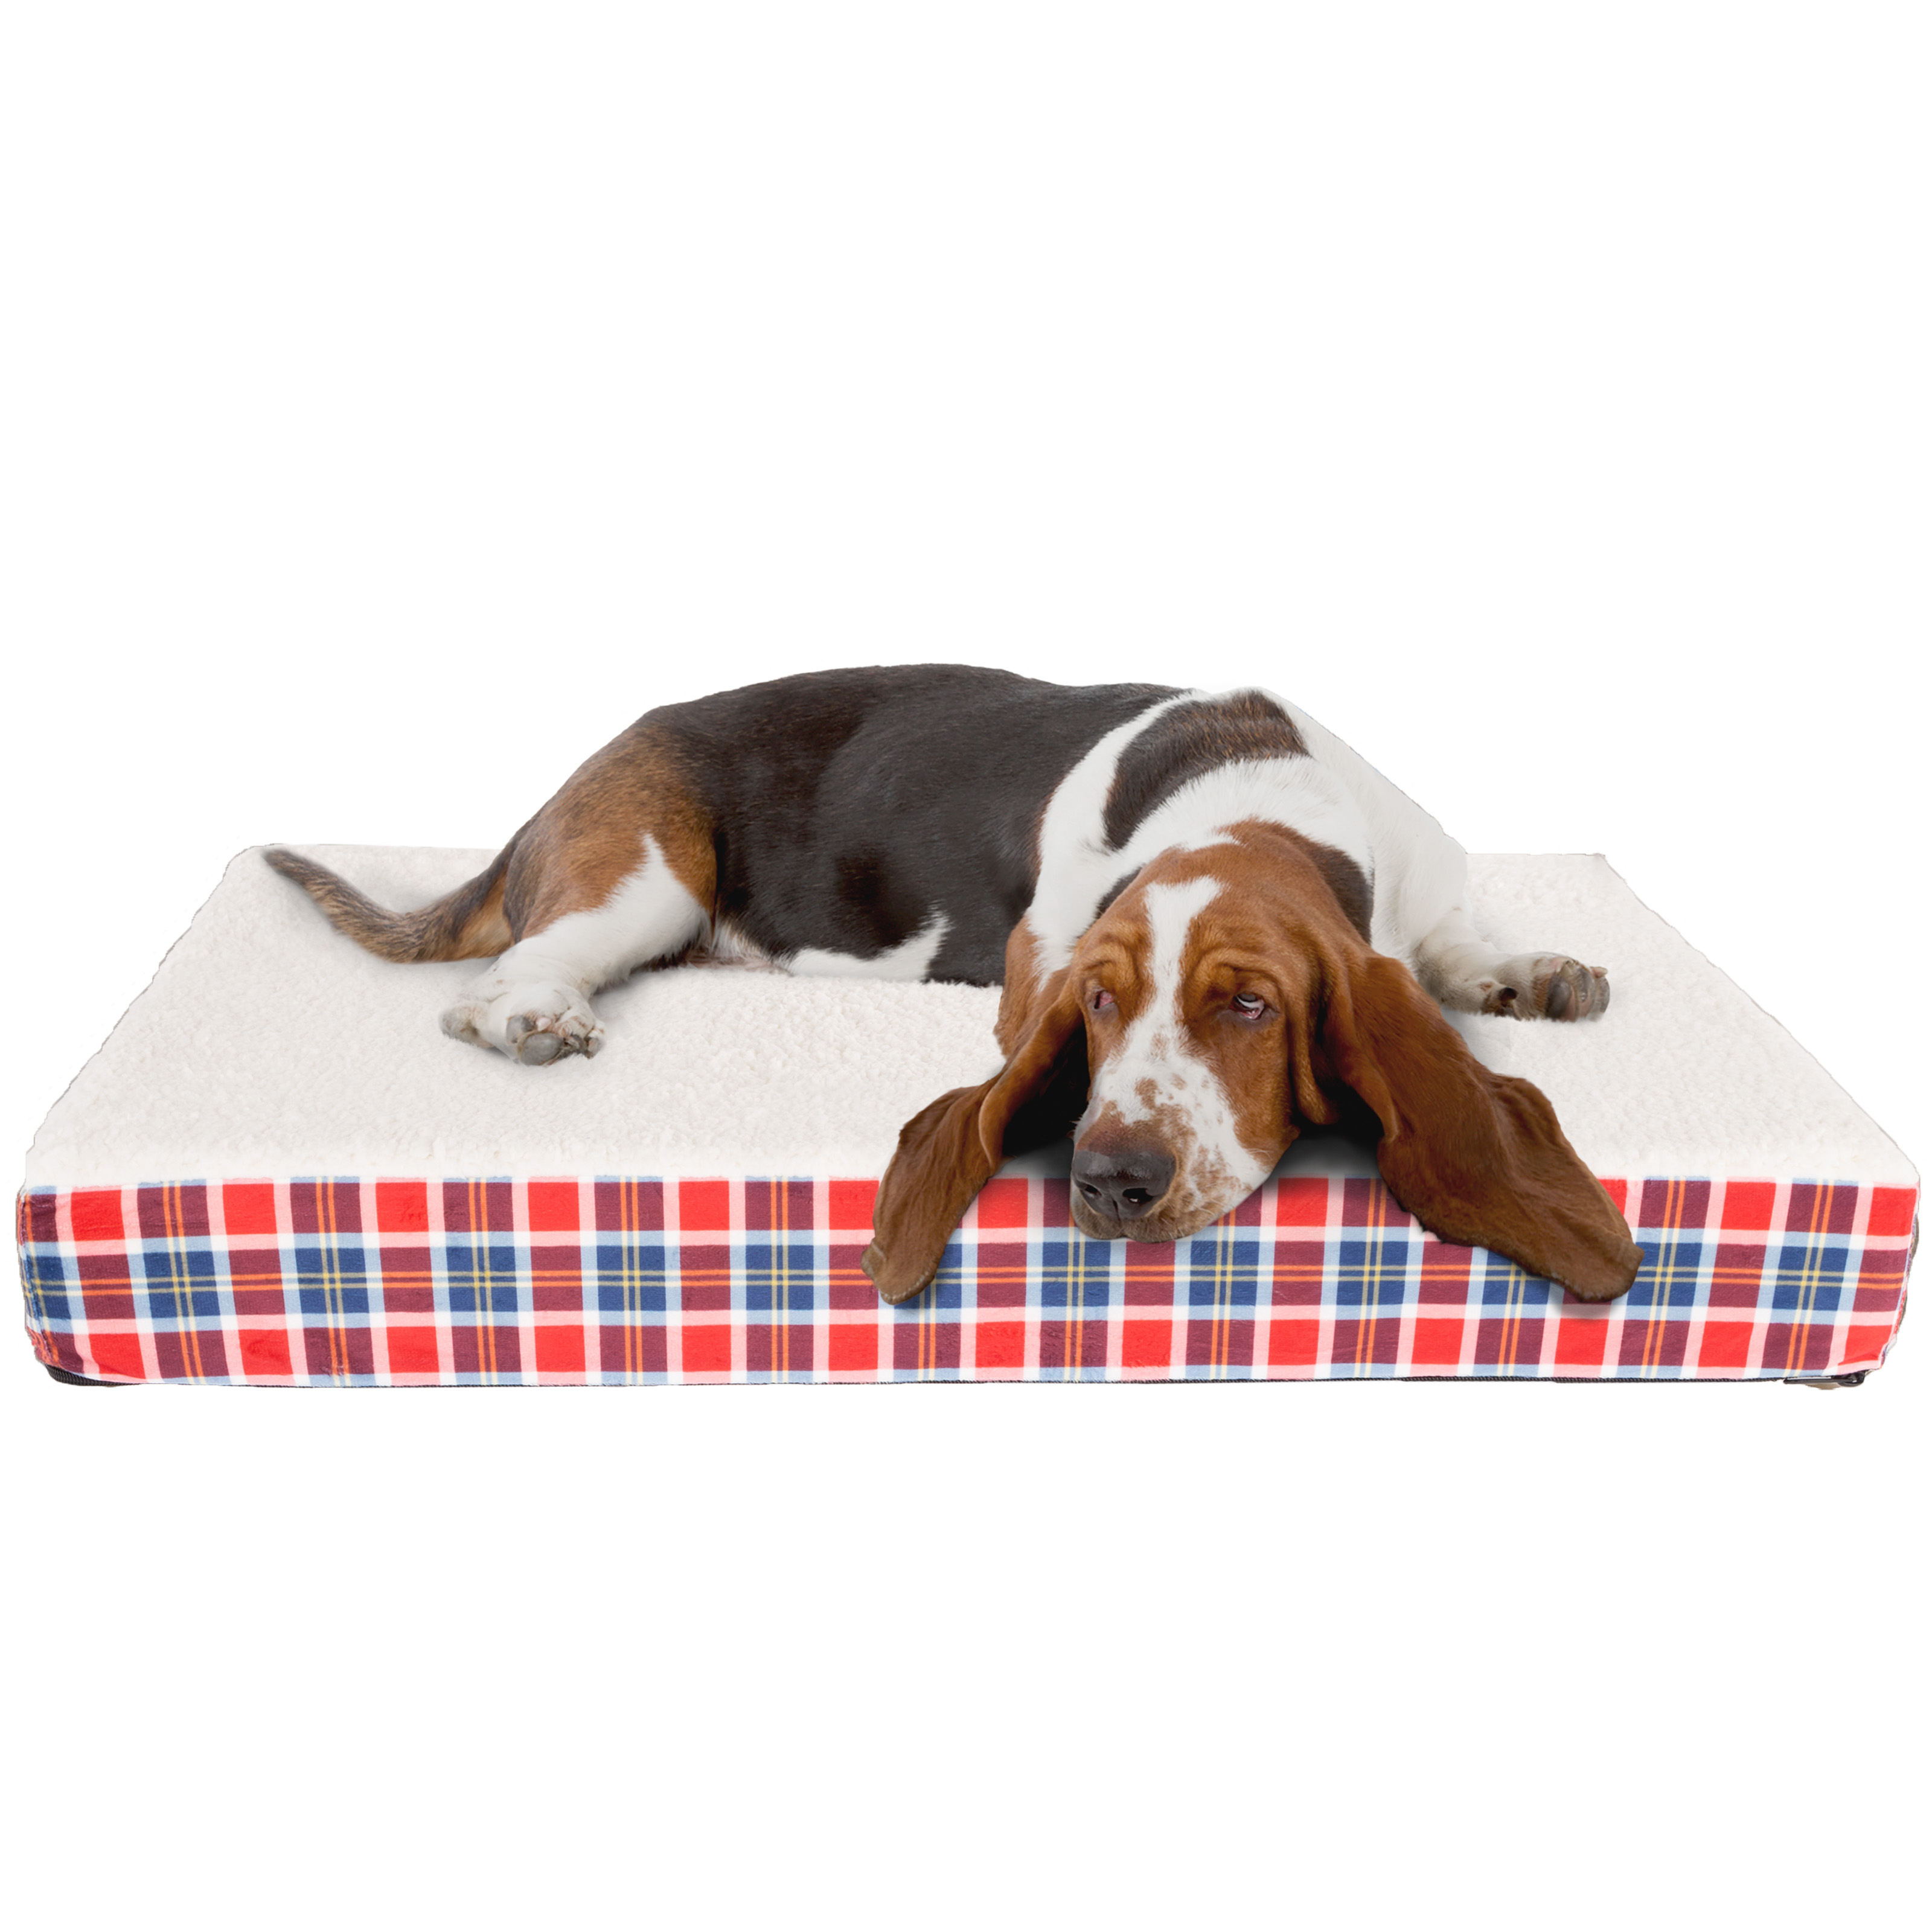 Orthopedic Dog Bed With Memory Foam And Sherpa Top Â Removable, Machine Washable Cover Â 36.5 X 27 X 3.75 Pet Bed By Petmaker (Plaid)